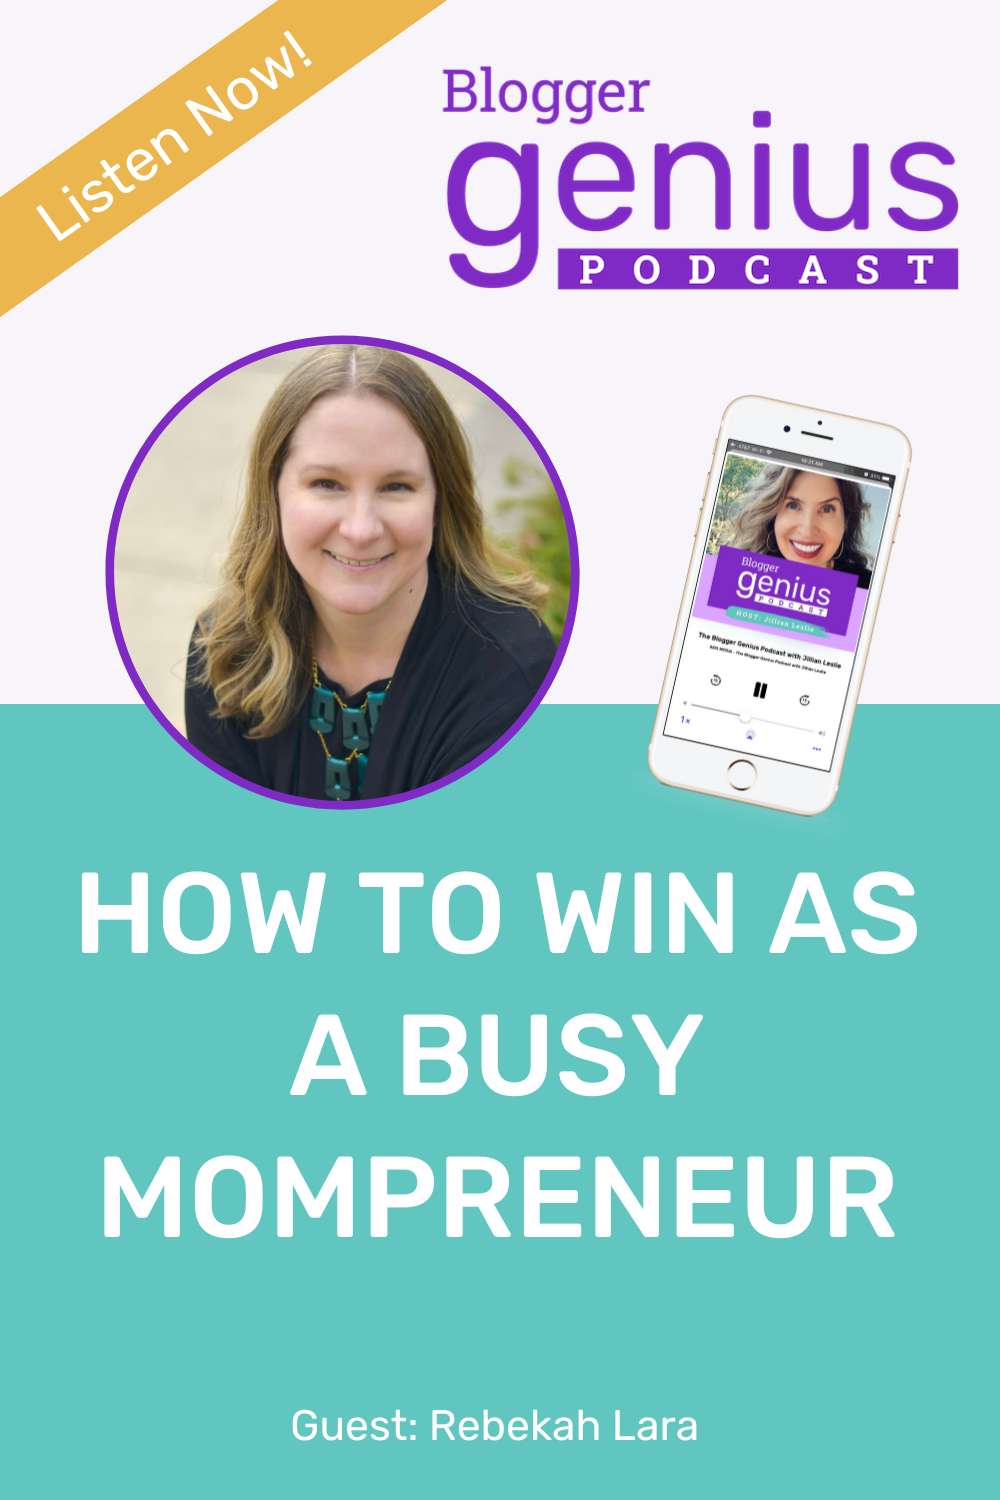 New episode of The Blogger Genus Podcast about calming the chaos as a busy mompreneur.